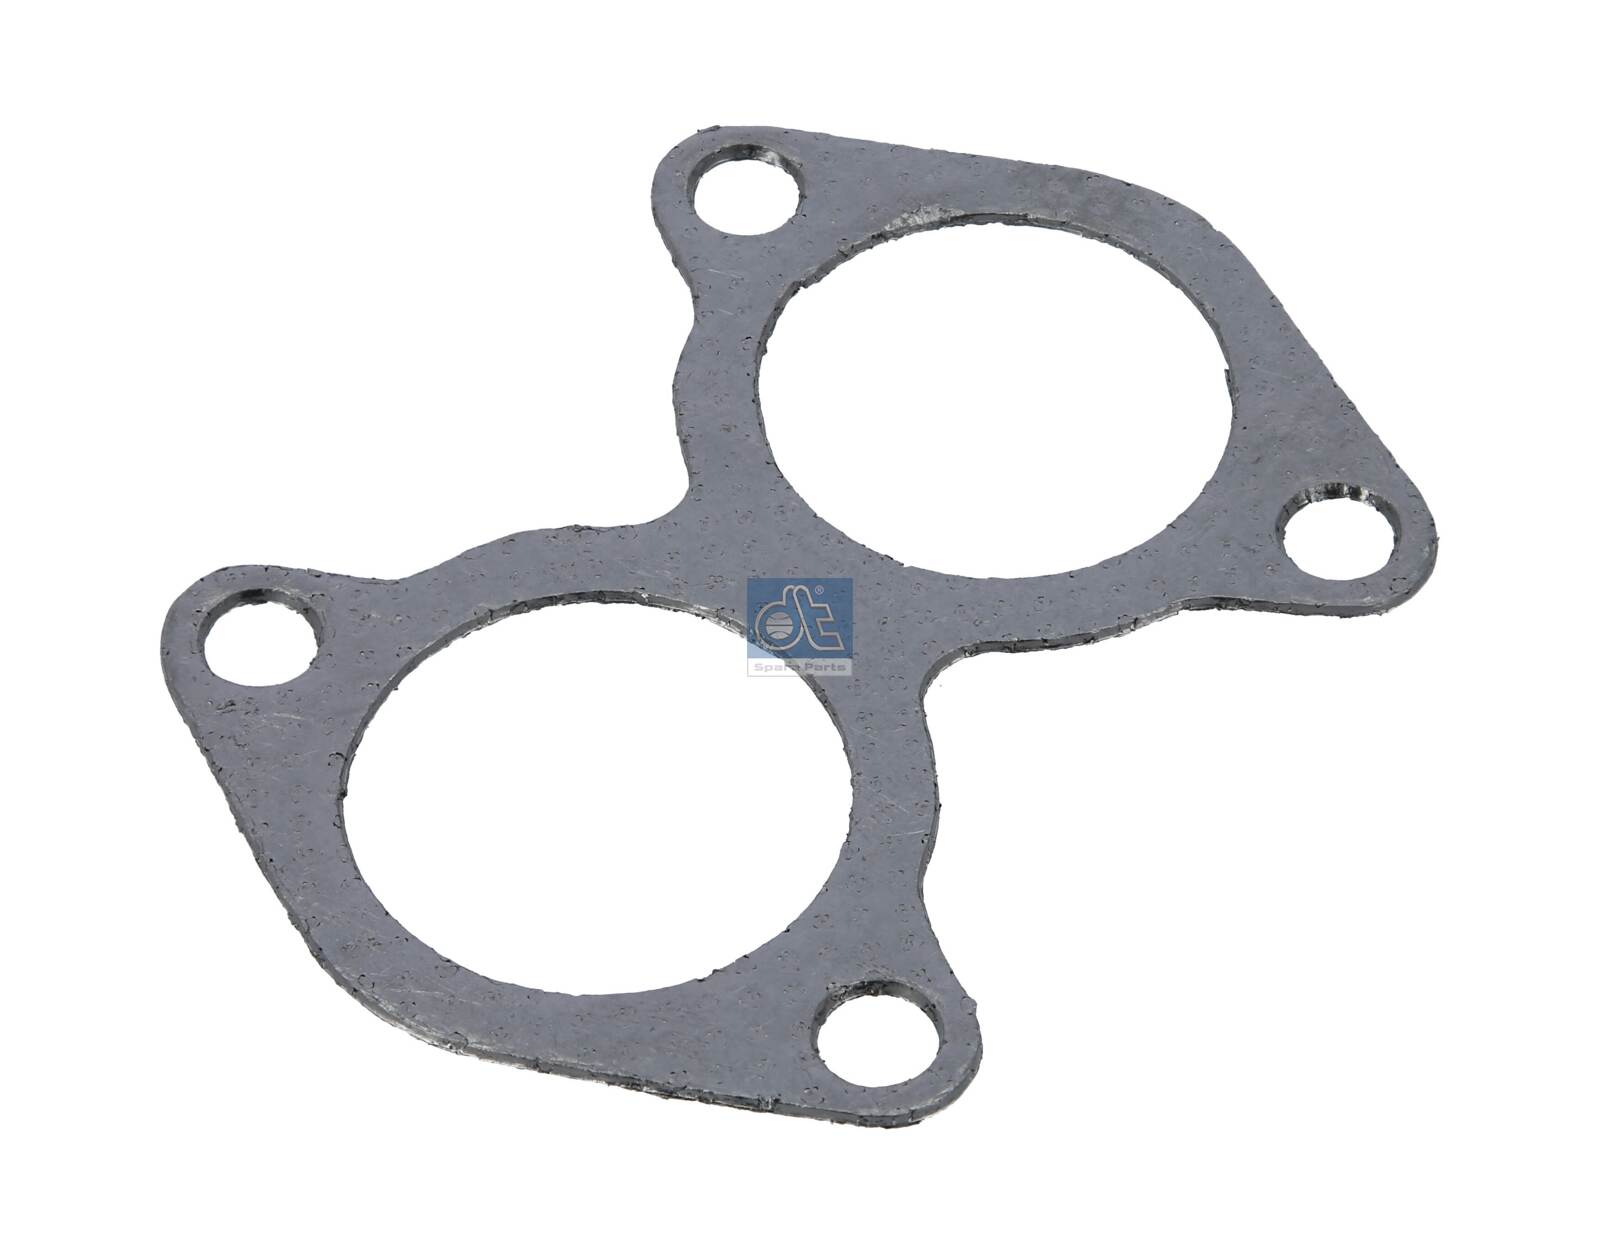 1.10557, Gasket, exhaust manifold, DT Spare Parts, 318416, 378264, 04.16.008, 044.372, 09907, 1243952, 13161300, 15093, 21945, 61835COS, 70-31161-00, 87016, 893.374, 21945LMA, 31-028061-00, 70-31161-10, 70521DPH, 21945.00, 61835, 71-31161-10, 21945.00LMA, 001630, S378264NTI, 002895, 017185, 017186, 378264X